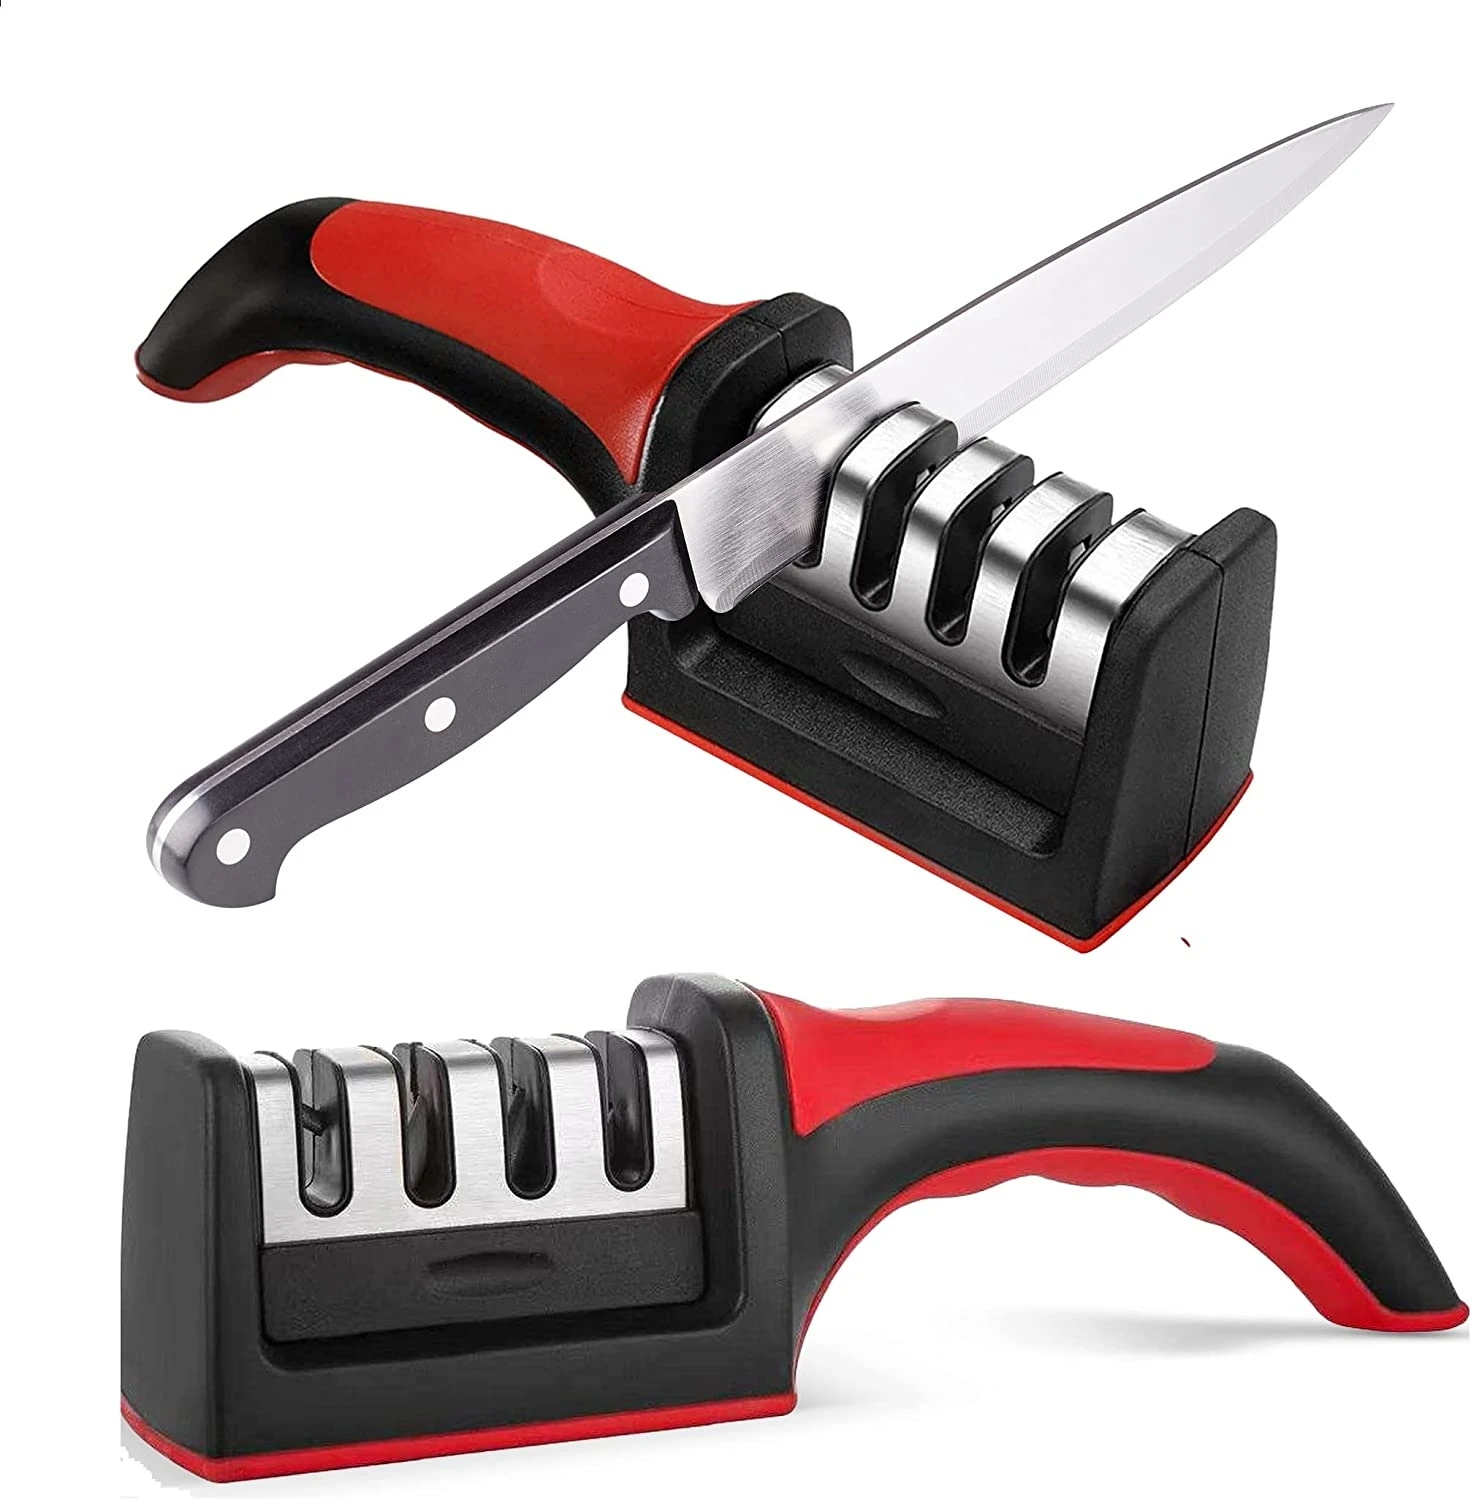 

Knife Sharpener Handheld New 3/4-Stages Type Quick Sharpening Scissors Tool With Non-slip Base Kitchen Knives Accessories Gadget